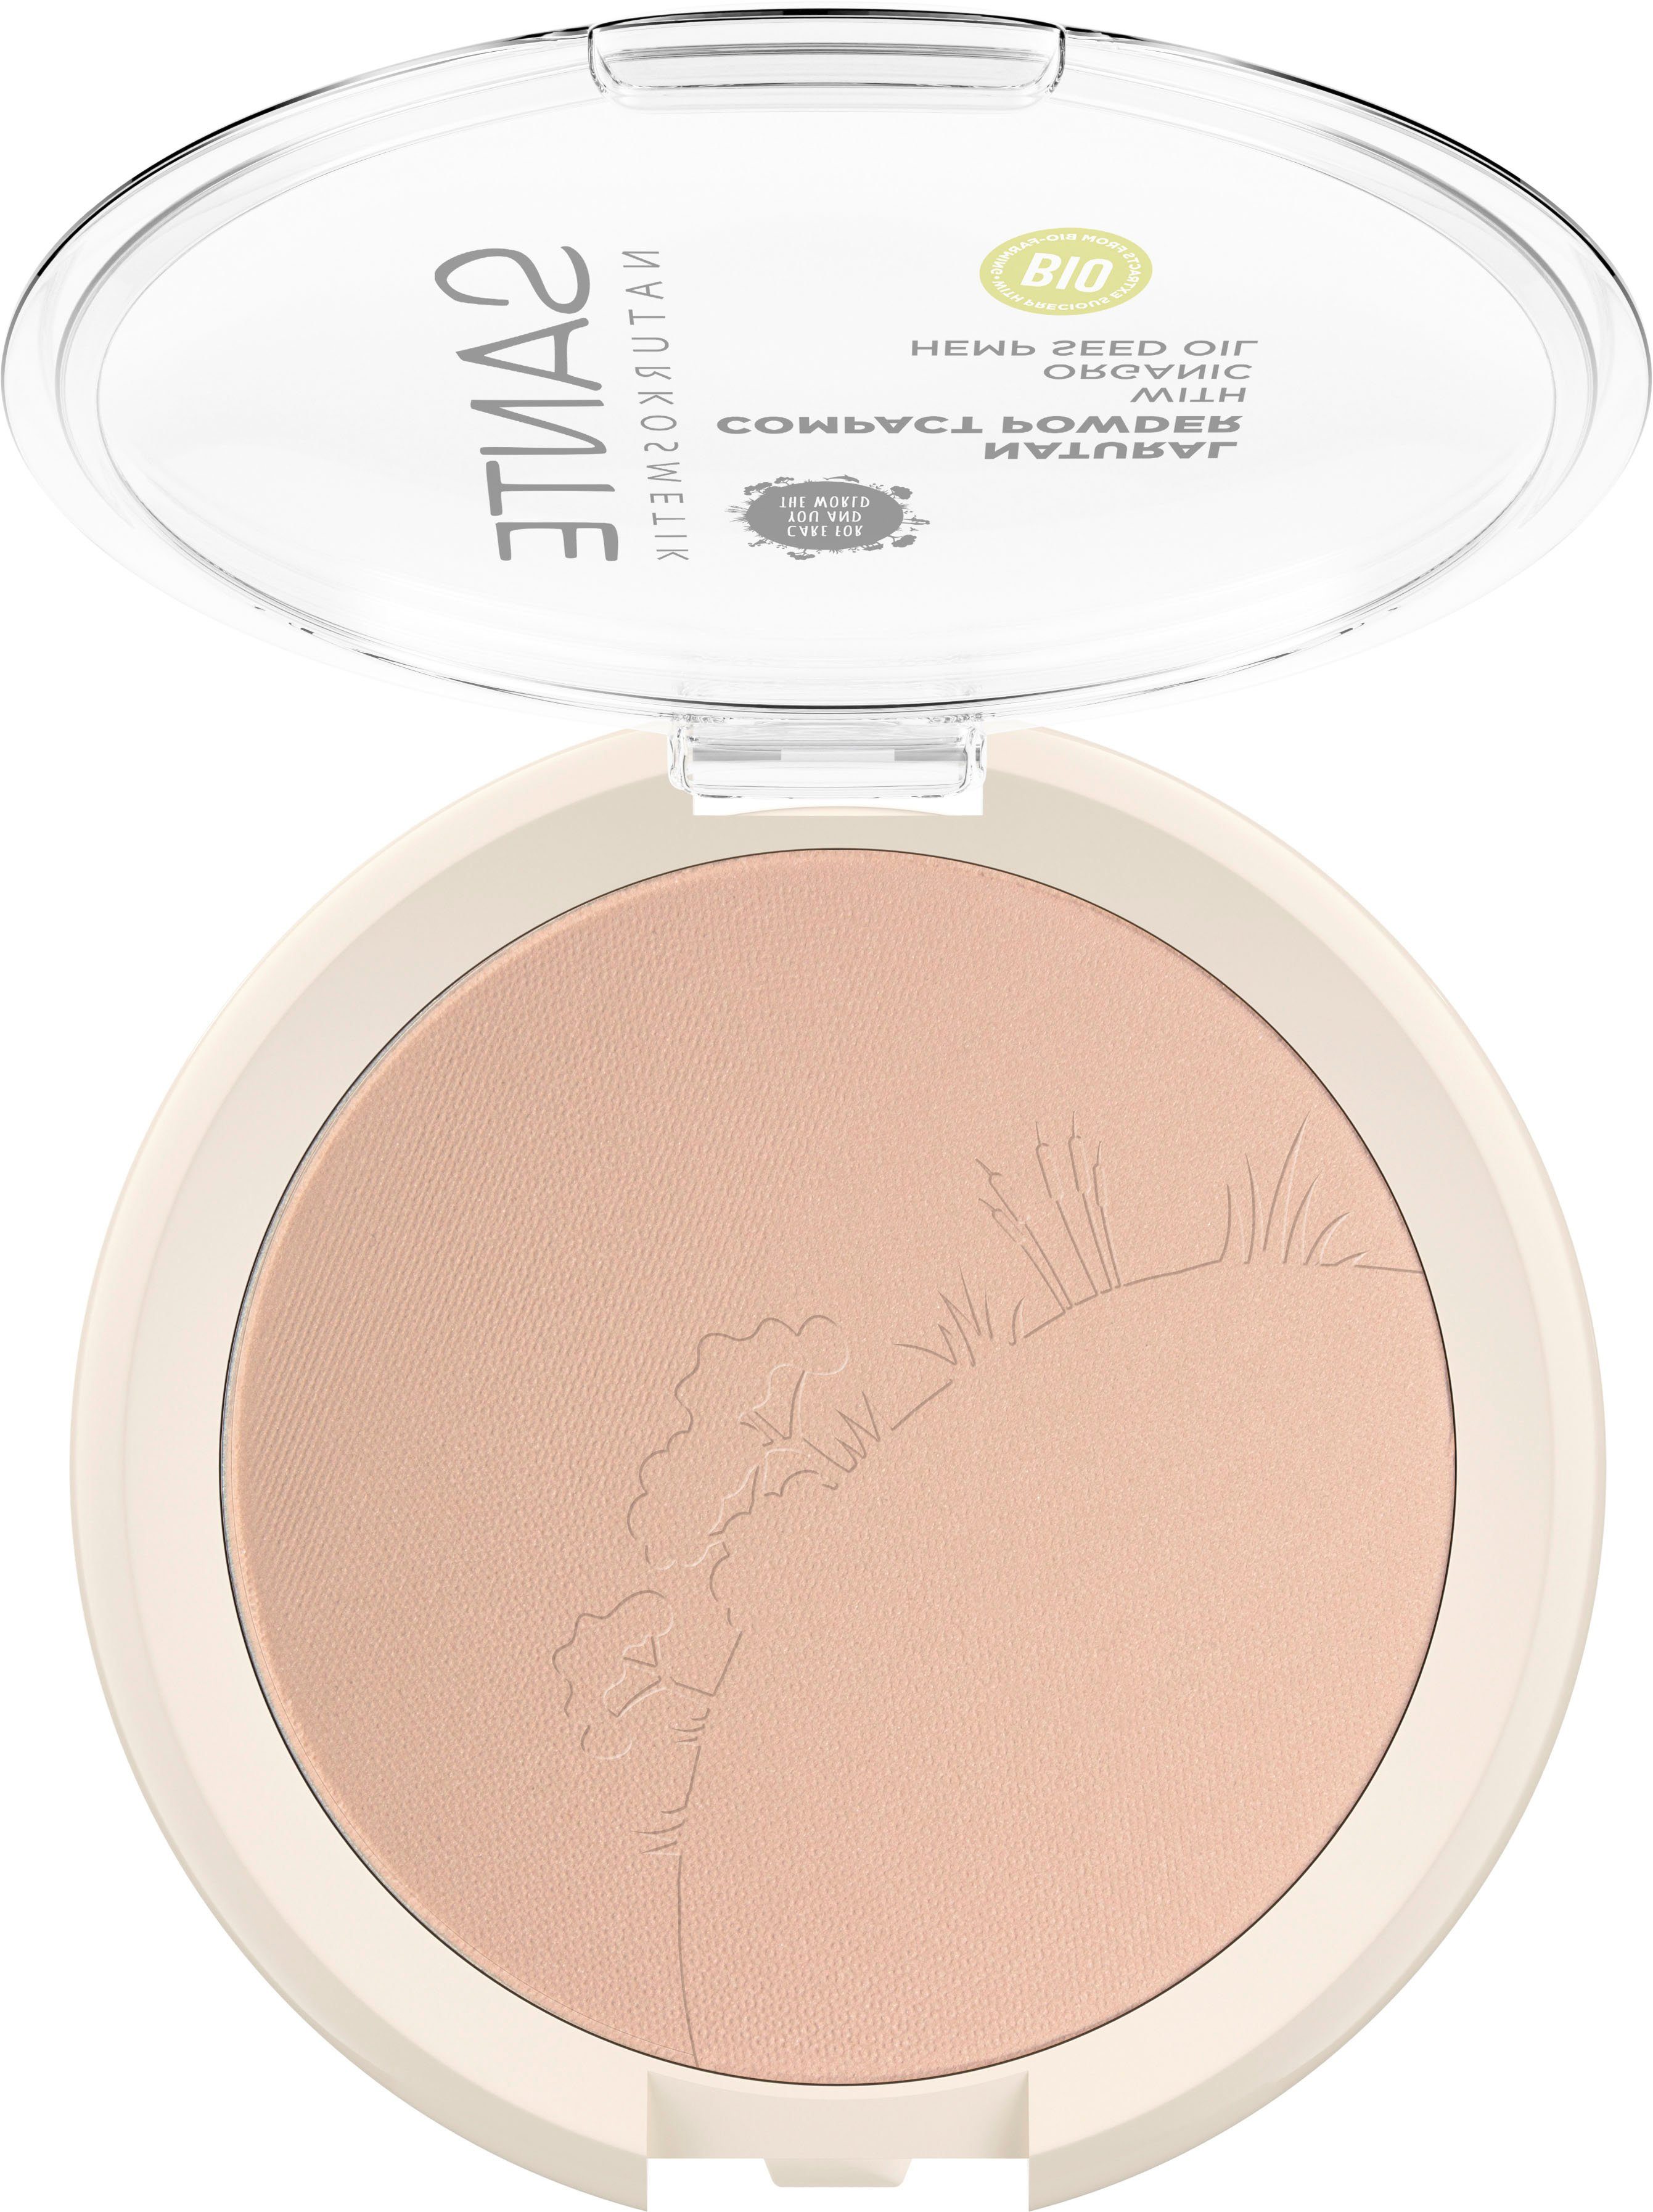 SANTE Puder Natural Ivory Powder 01 Cool Compact